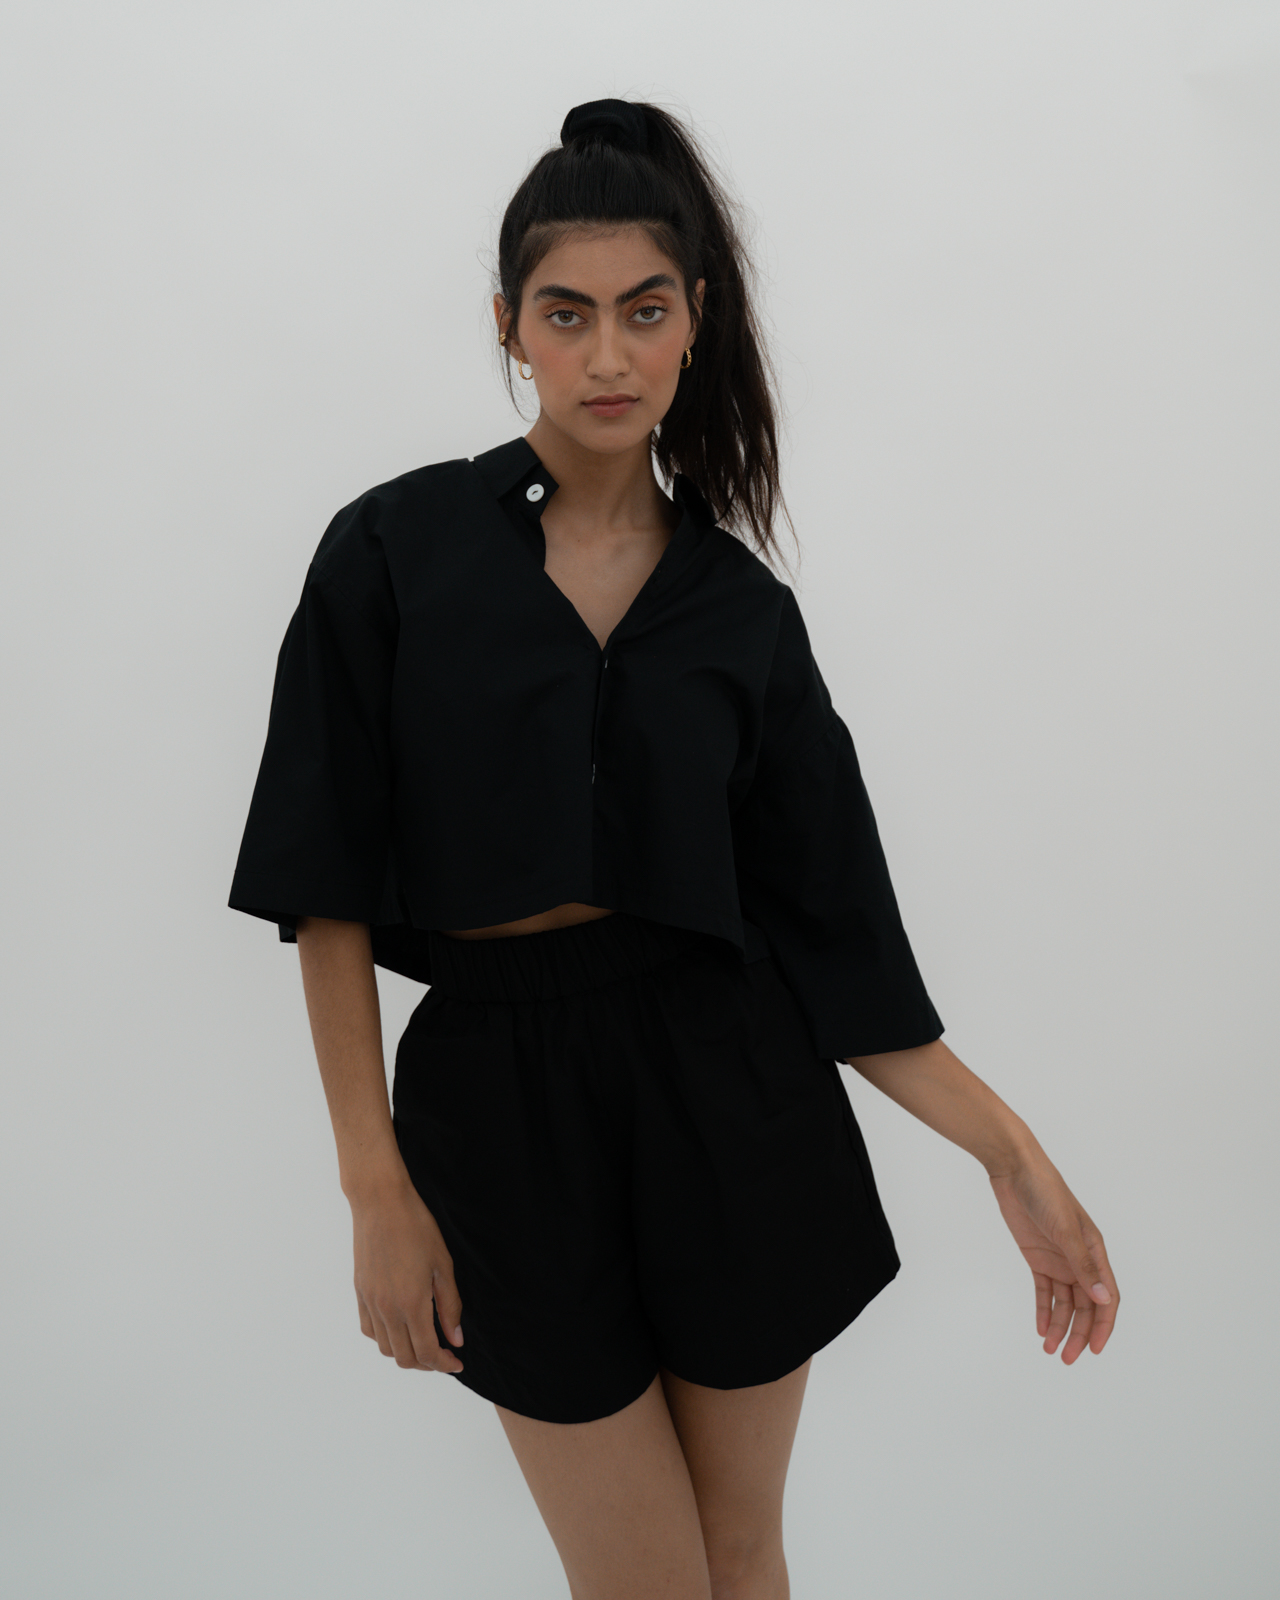 Variations: The Cropped Shirt Short Sleeve Black